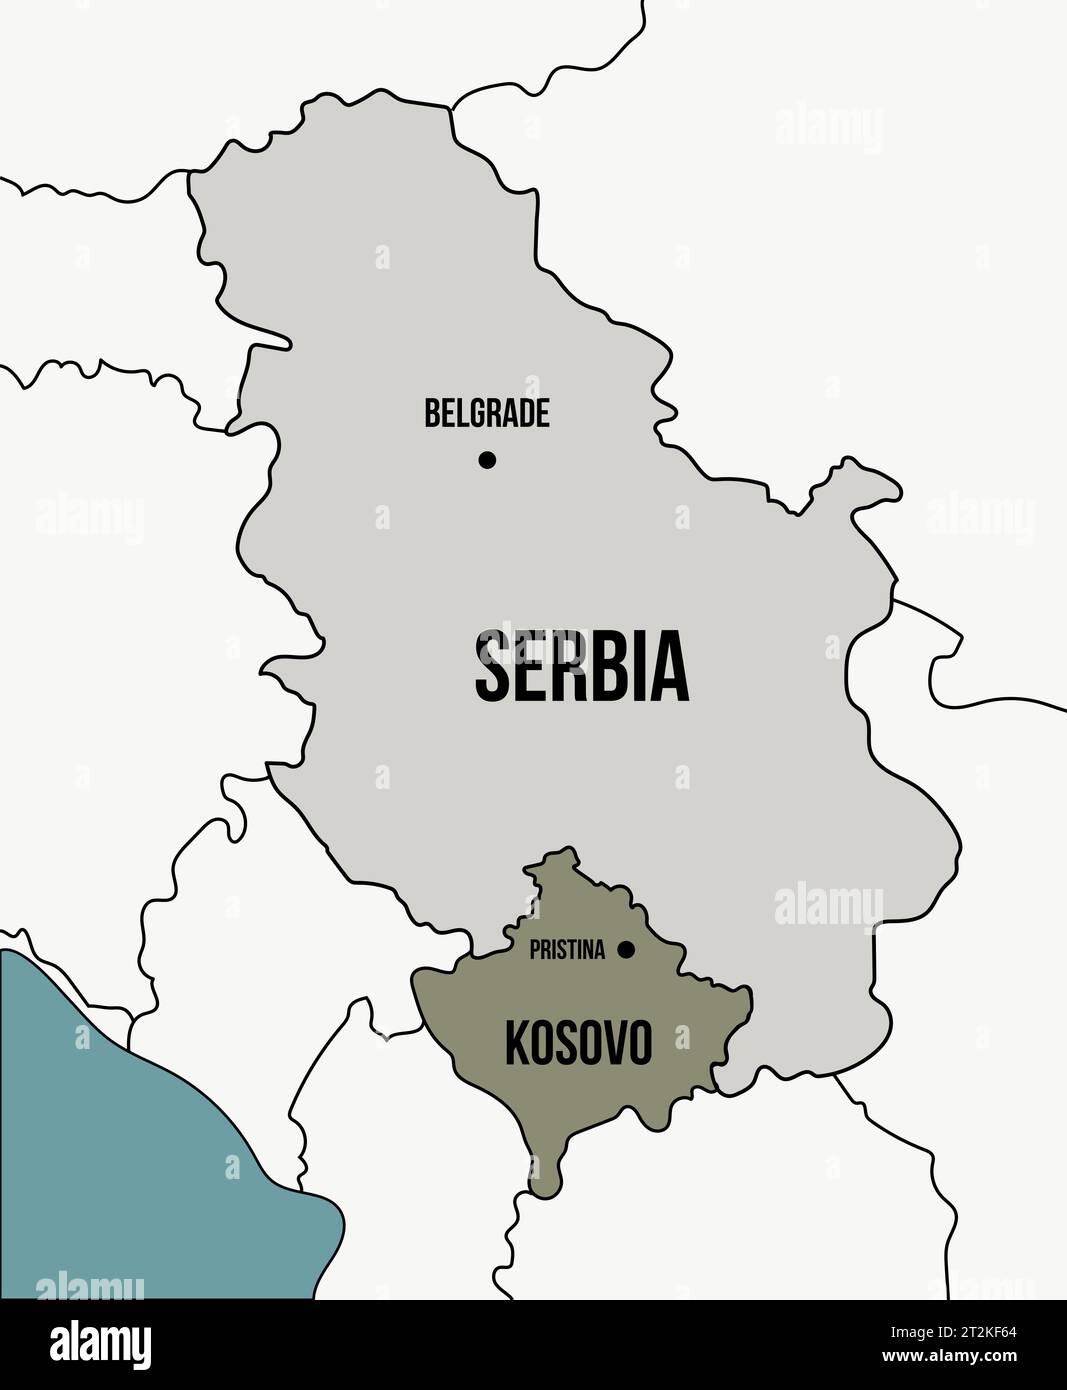 Simple map with borders between Republic of Serbia and the Republic of Kosovo and main cities. Crisis between Belgrade and Pristina. Vector illustrati Stock Vector